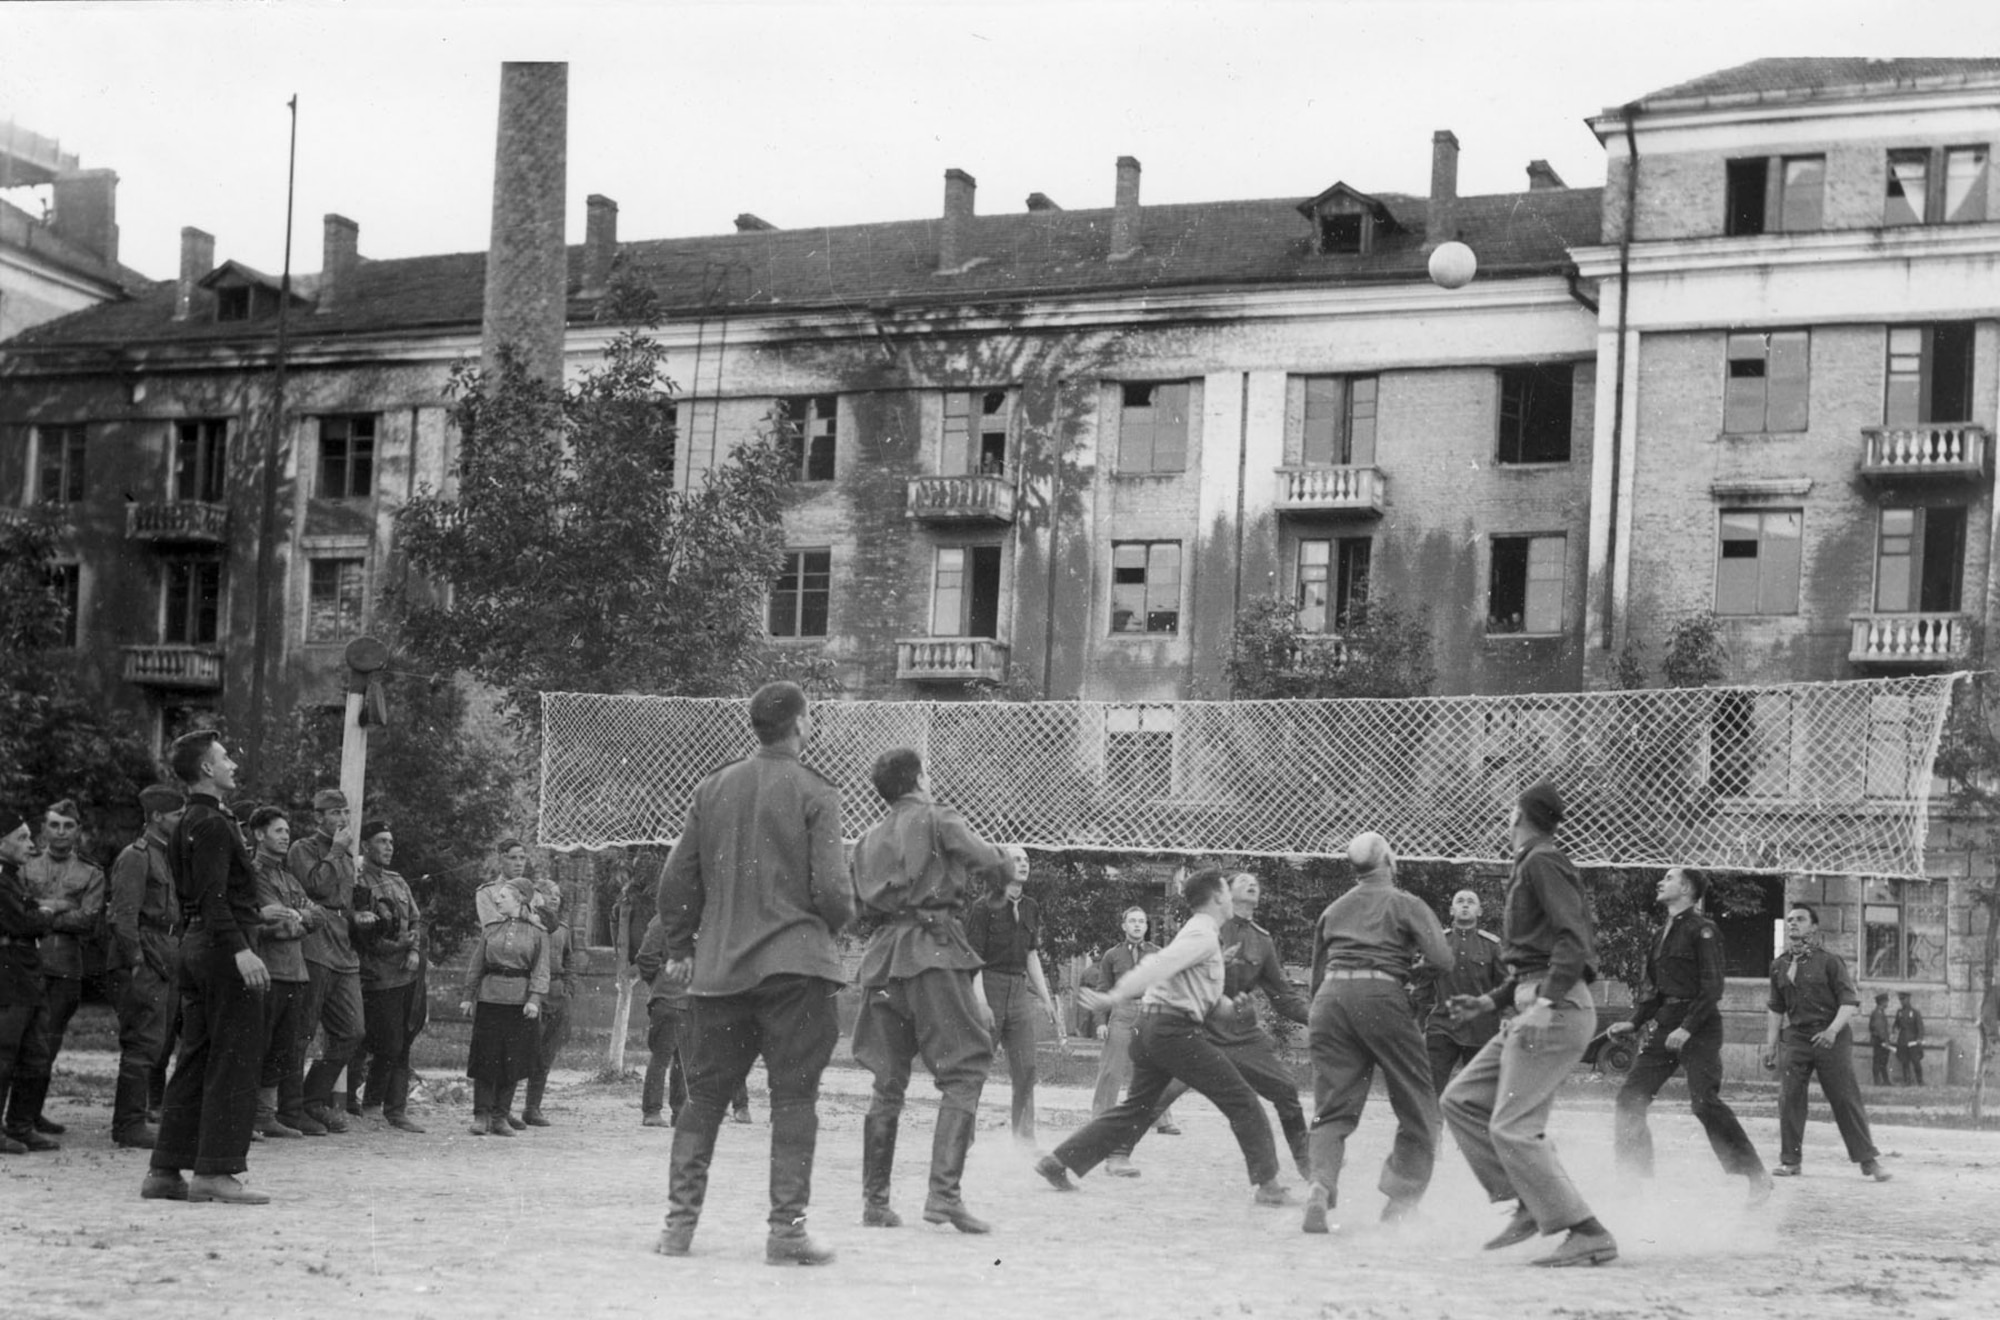 The Soviets turned out to be expert volleyball players, and every night in the courtyard of Eastern Command HQ at Poltava, there were fast mixed games. Player fifth from the right at bottom is Gen. Ira Eaker. (U.S. Air Force photo)